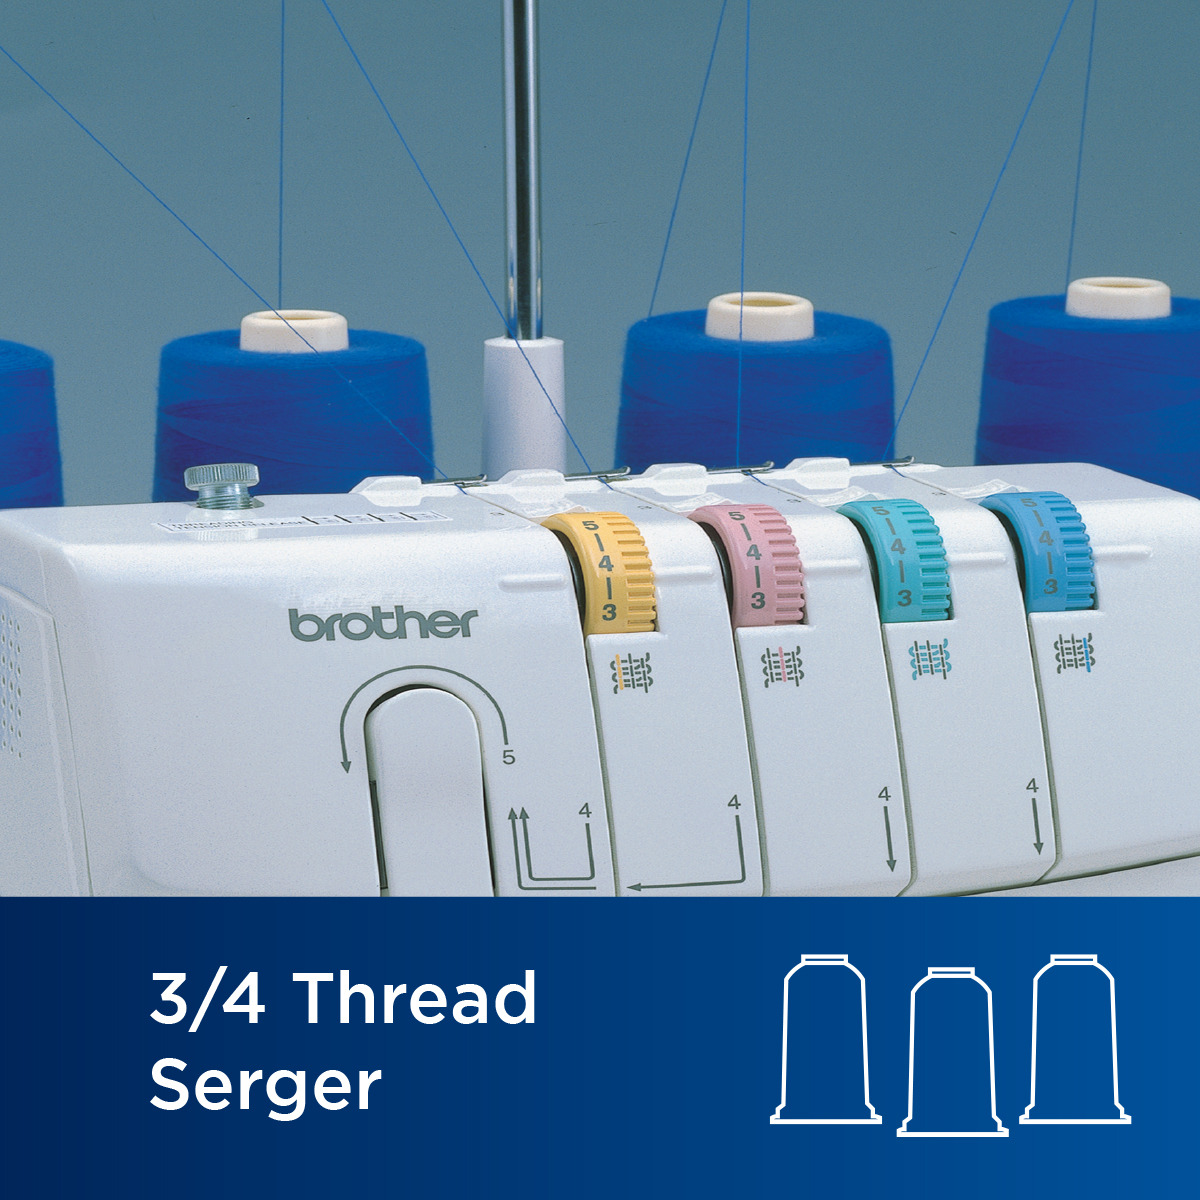 Brother 1034D 3 or 4 Thread Serger with Easy Lay-in Threading, White - image 3 of 9